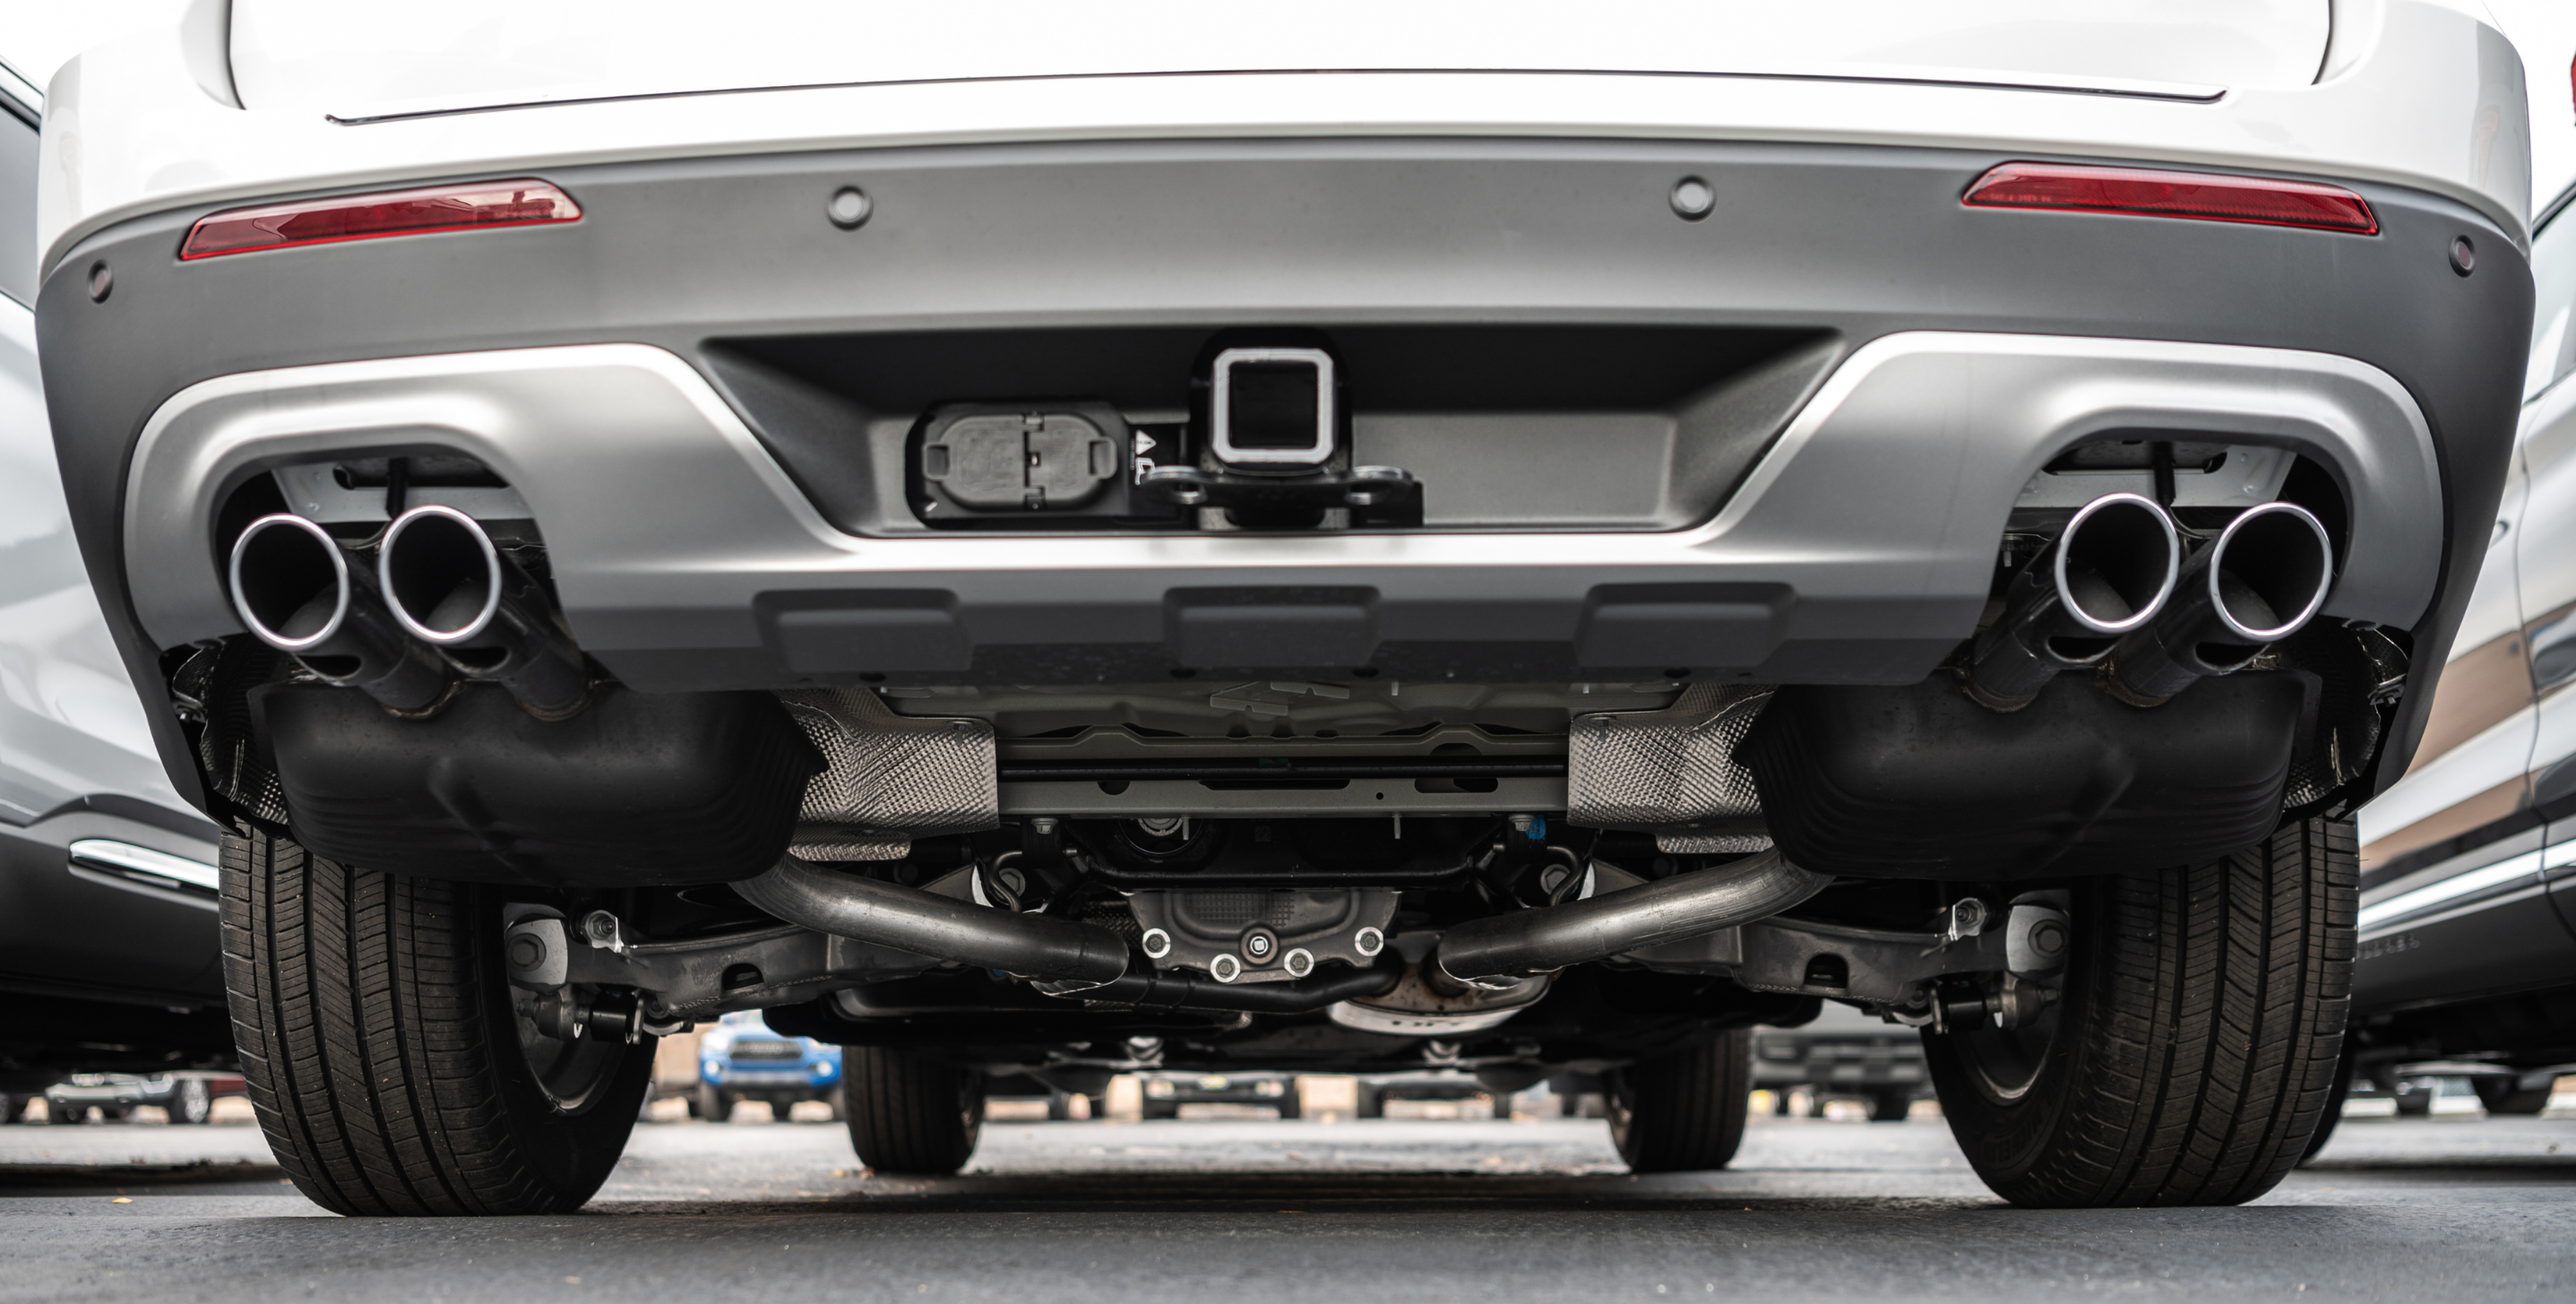 The Perfect Fit: Choosing a Cat-Back Exhaust